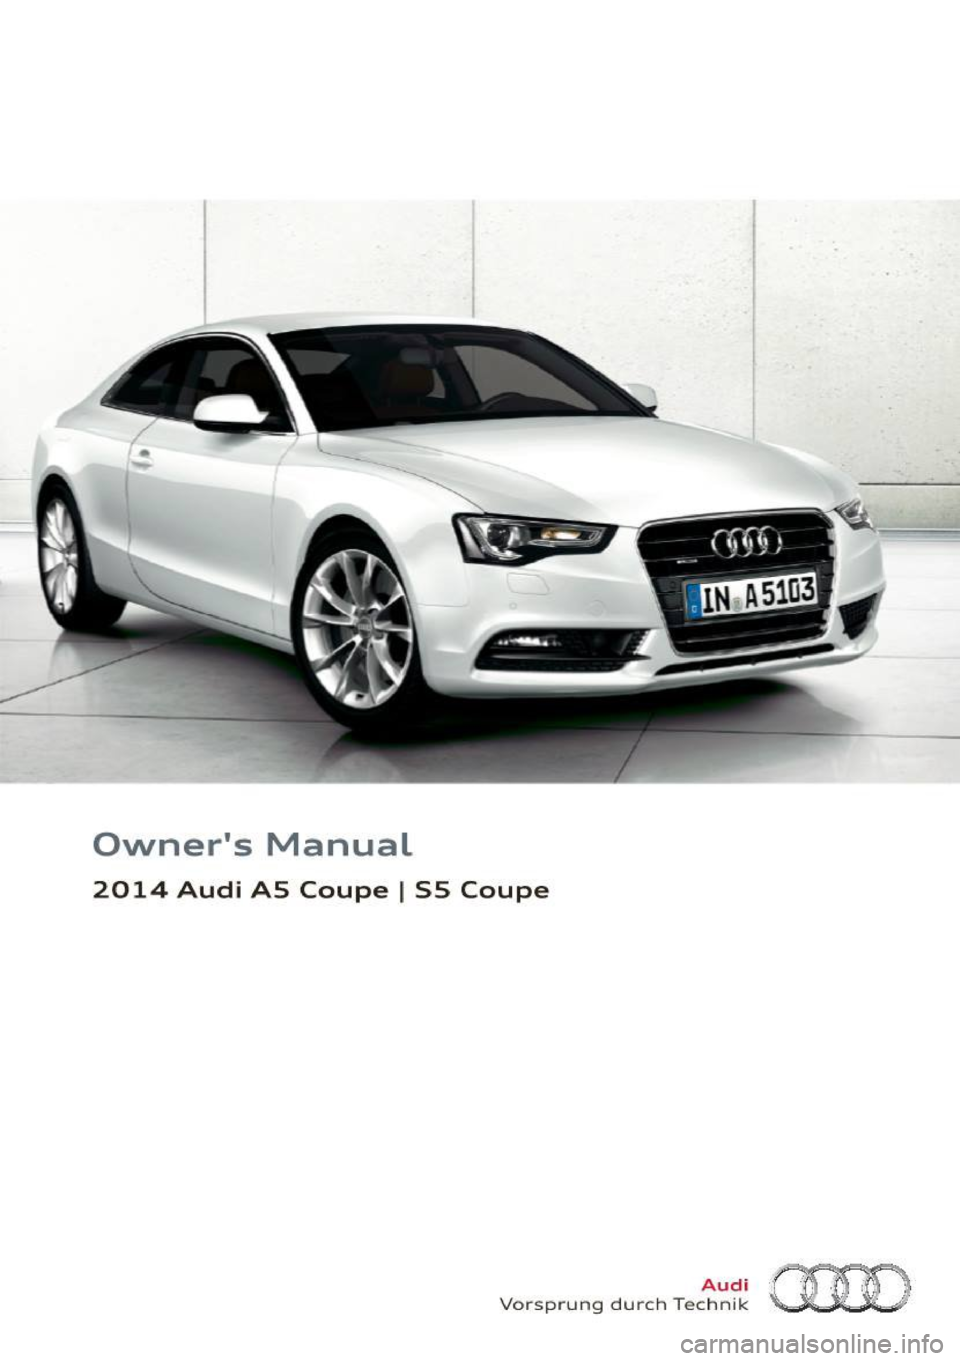 AUDI A5 COUPE 2014  Owners Manual Owners  Manual 
2014  Audi  AS  Coupe I S5  Coupe 
Vorsprung  durch Tec~~1~ :ml)  